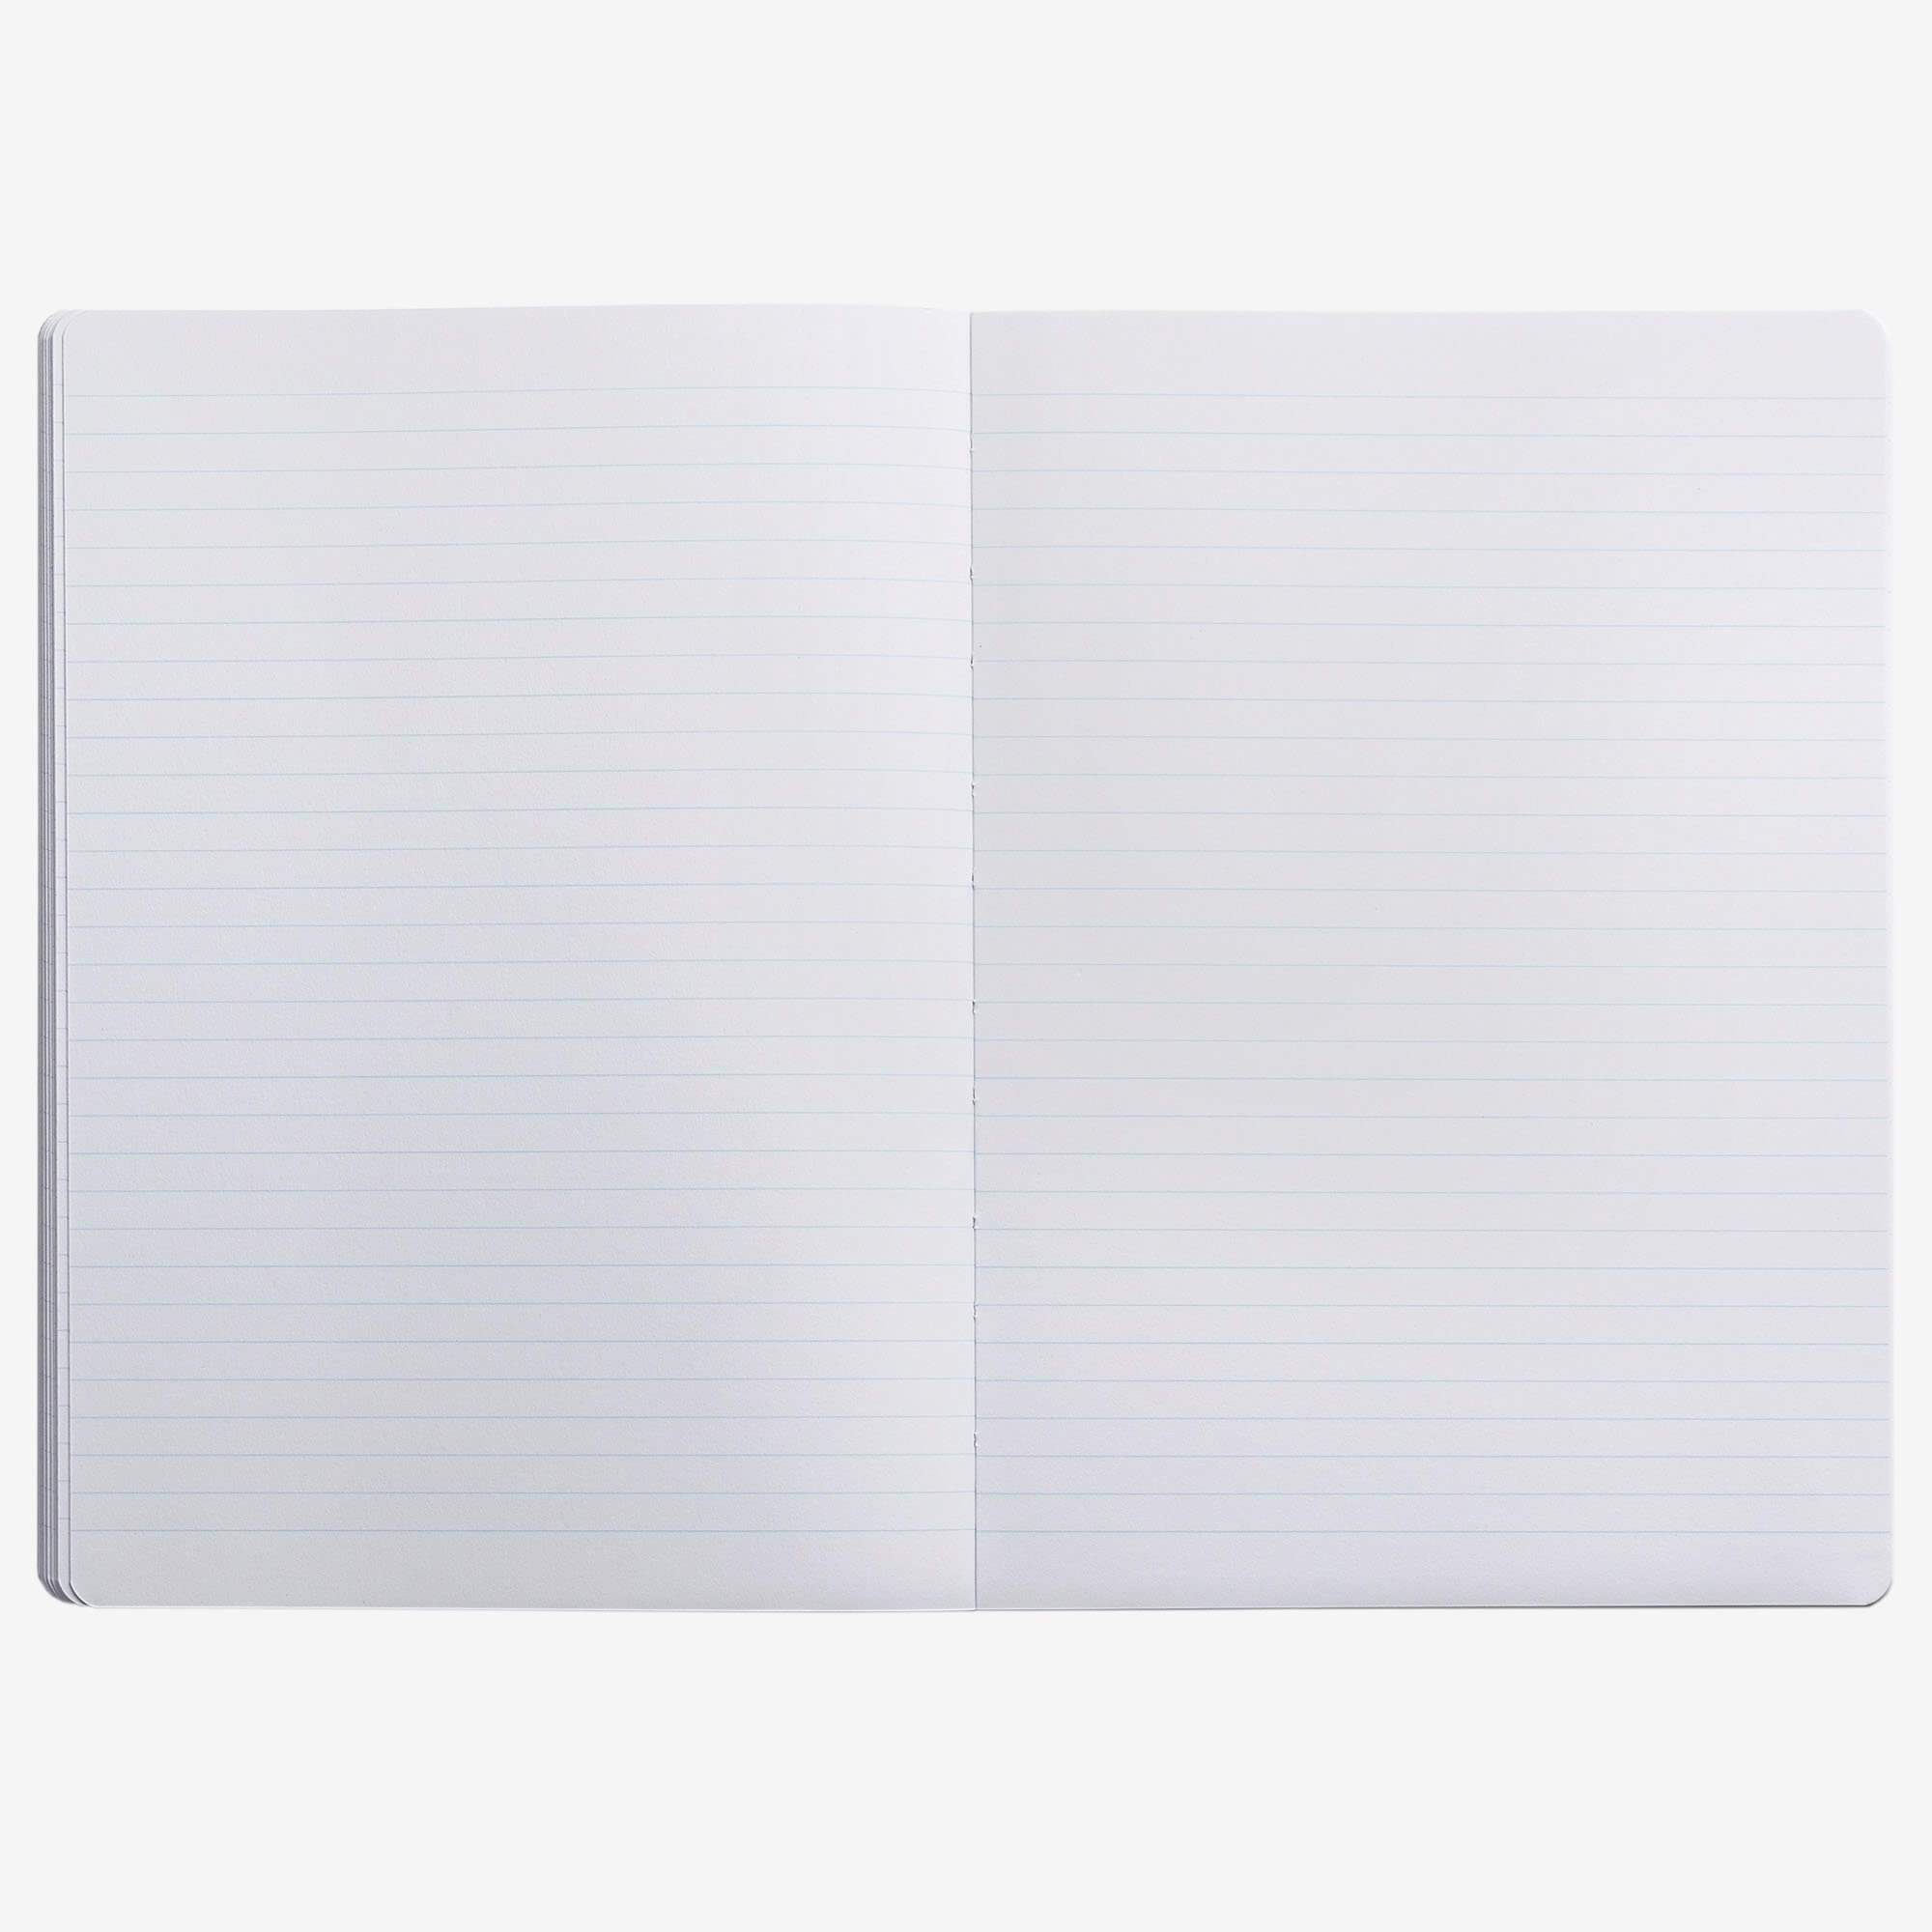 Notebook L Flowers - Carnet 160 pages Legami 